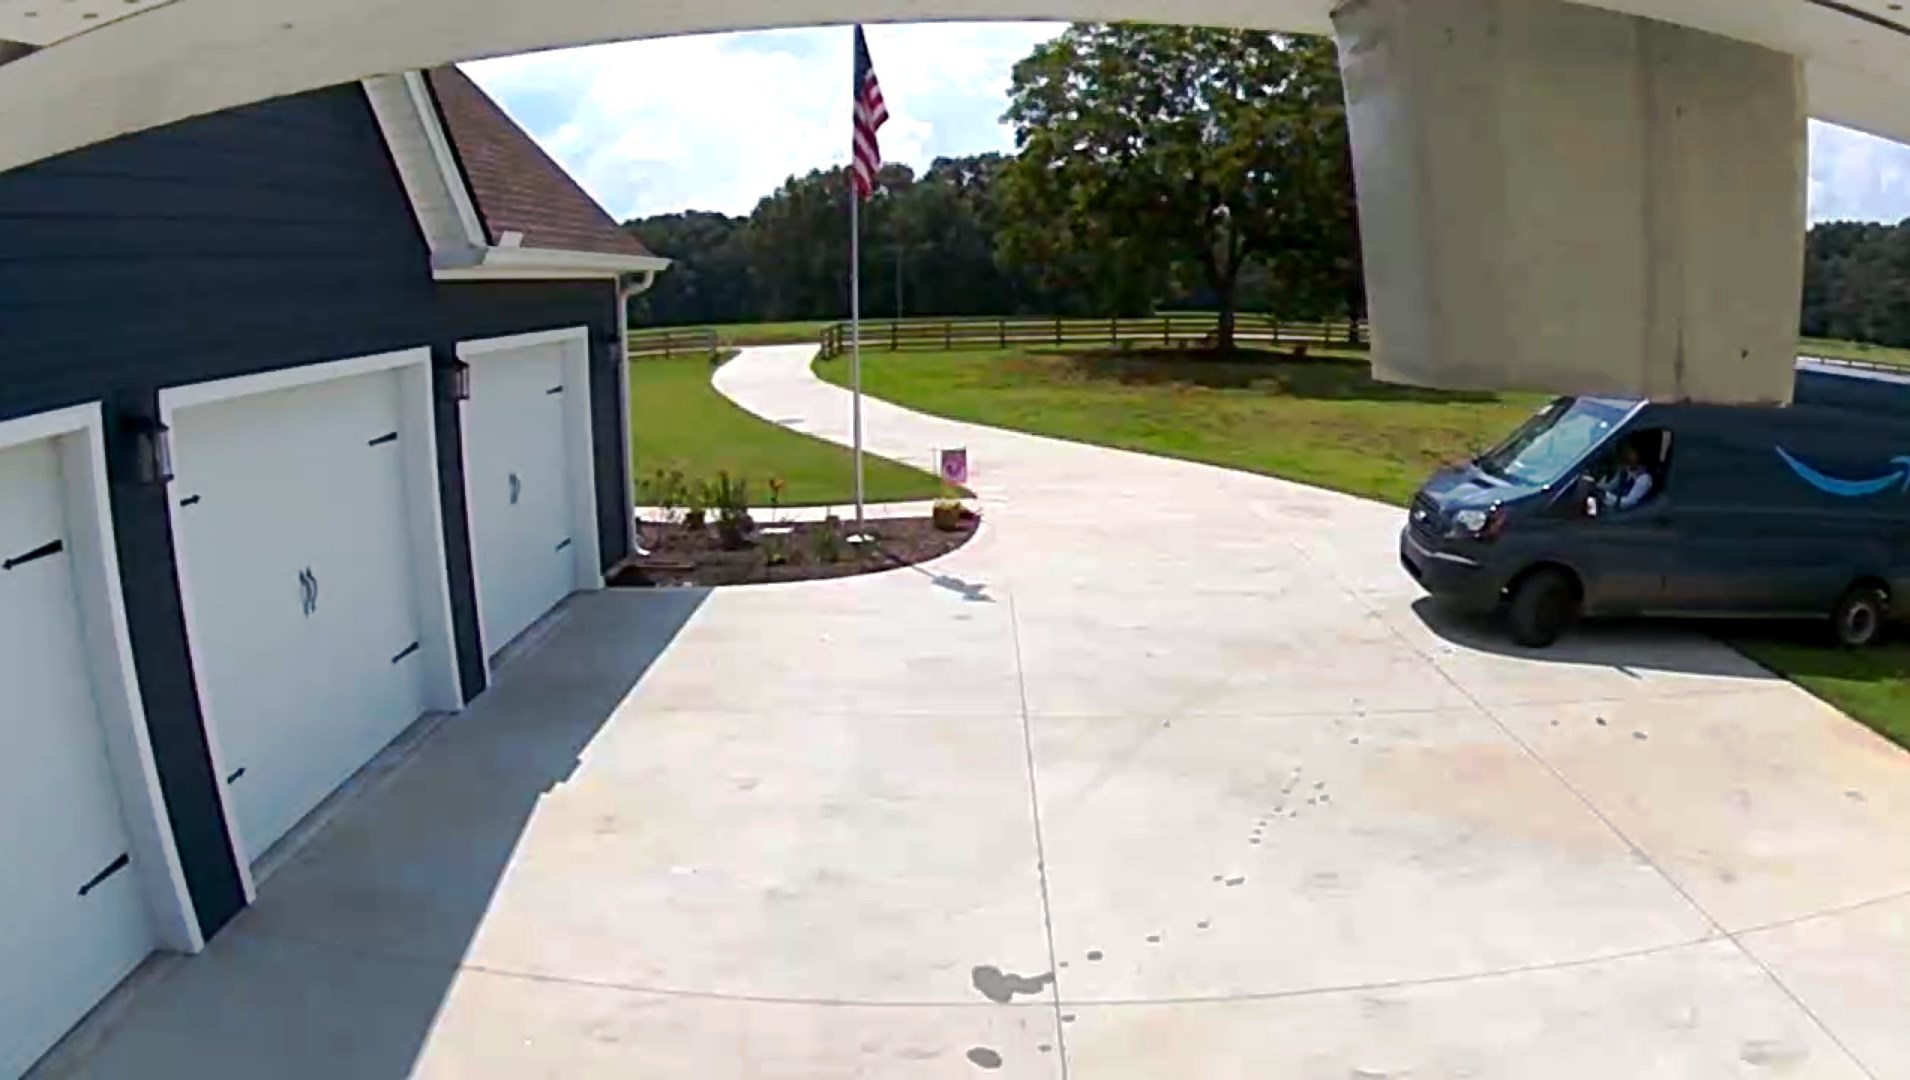 Amazon complaint Driver drove on grass while leaving